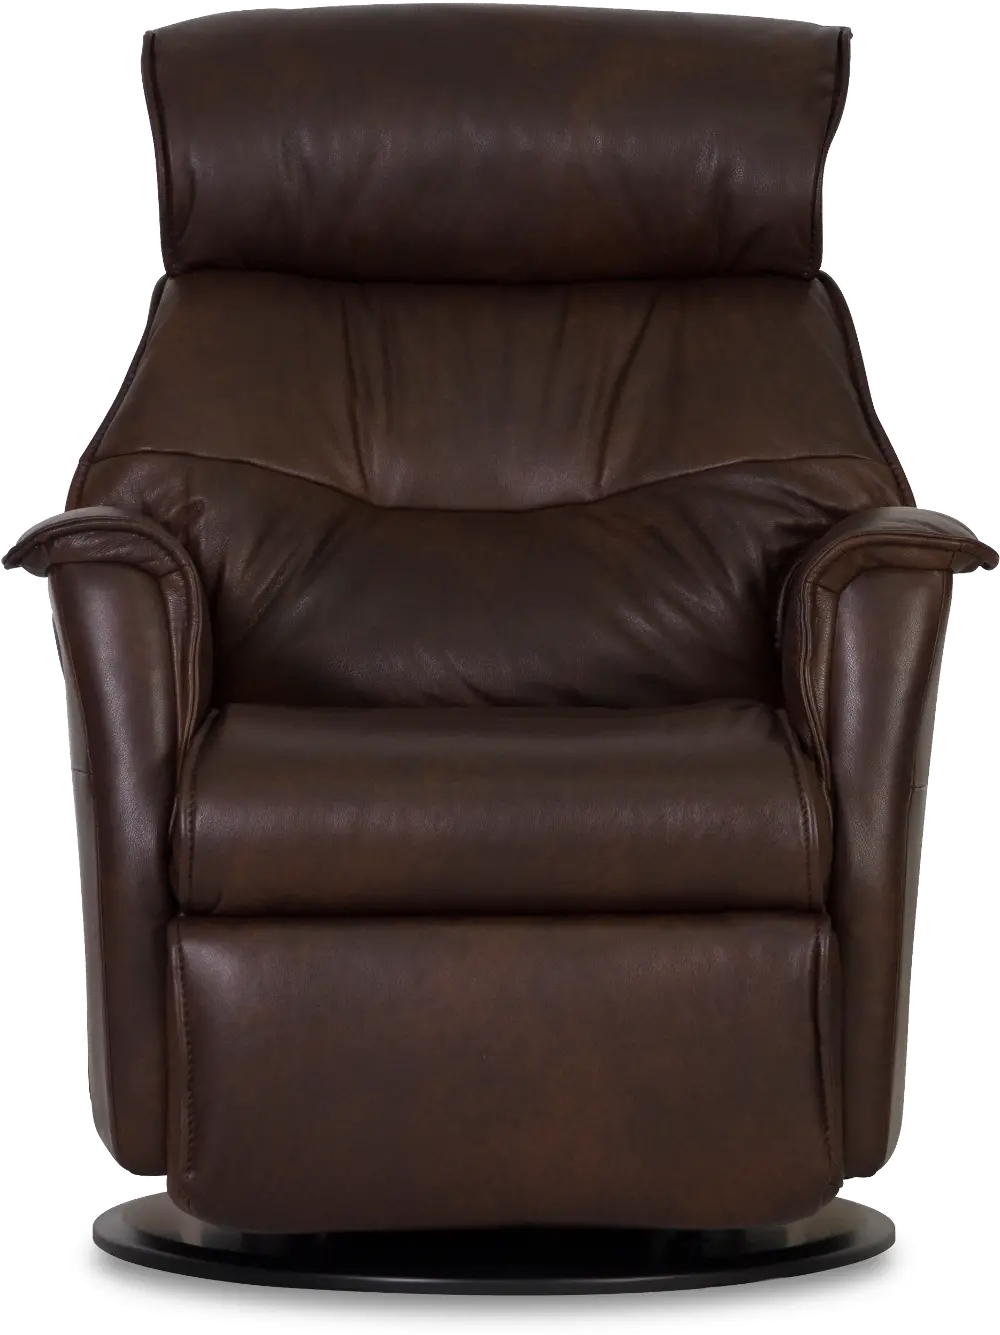 Truffle Brown Leather Compact Swivel Glider Power Recliner - Captain-1